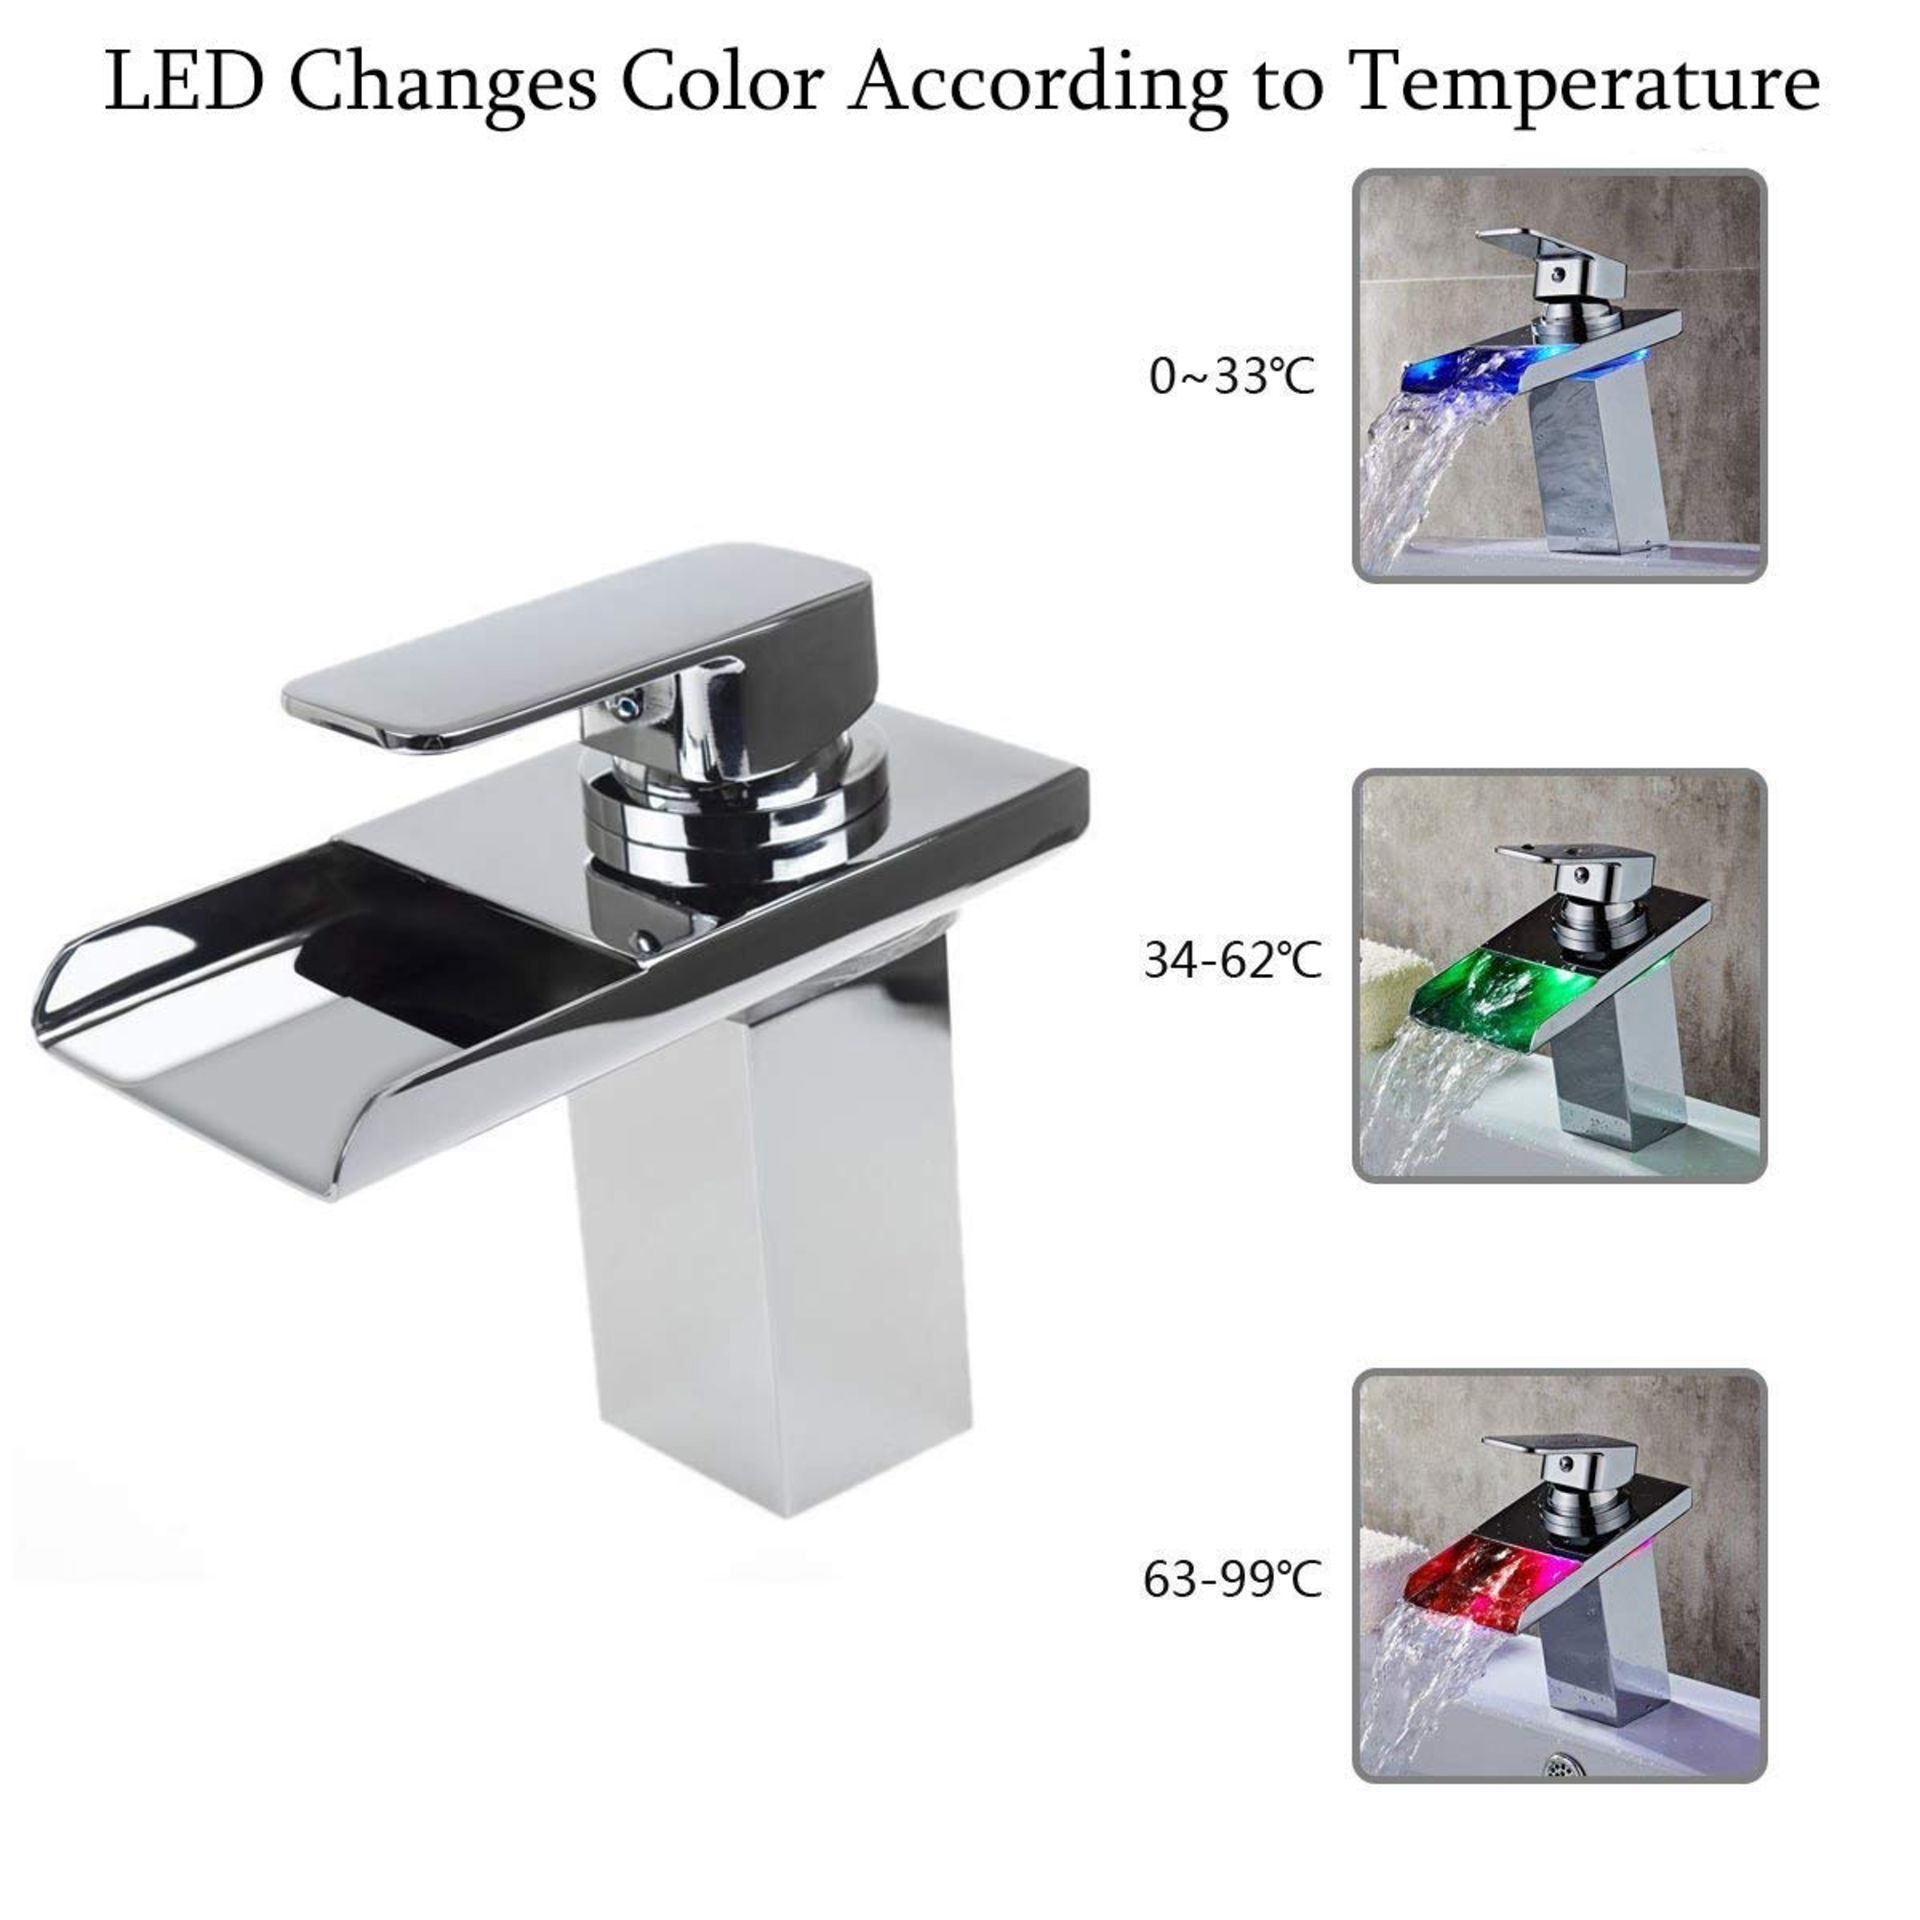 (RK1016) GROHES Colour Changing LED Light Bathroom Basin Monobloc Tap Temperature Sensor - Sing... - Image 2 of 4